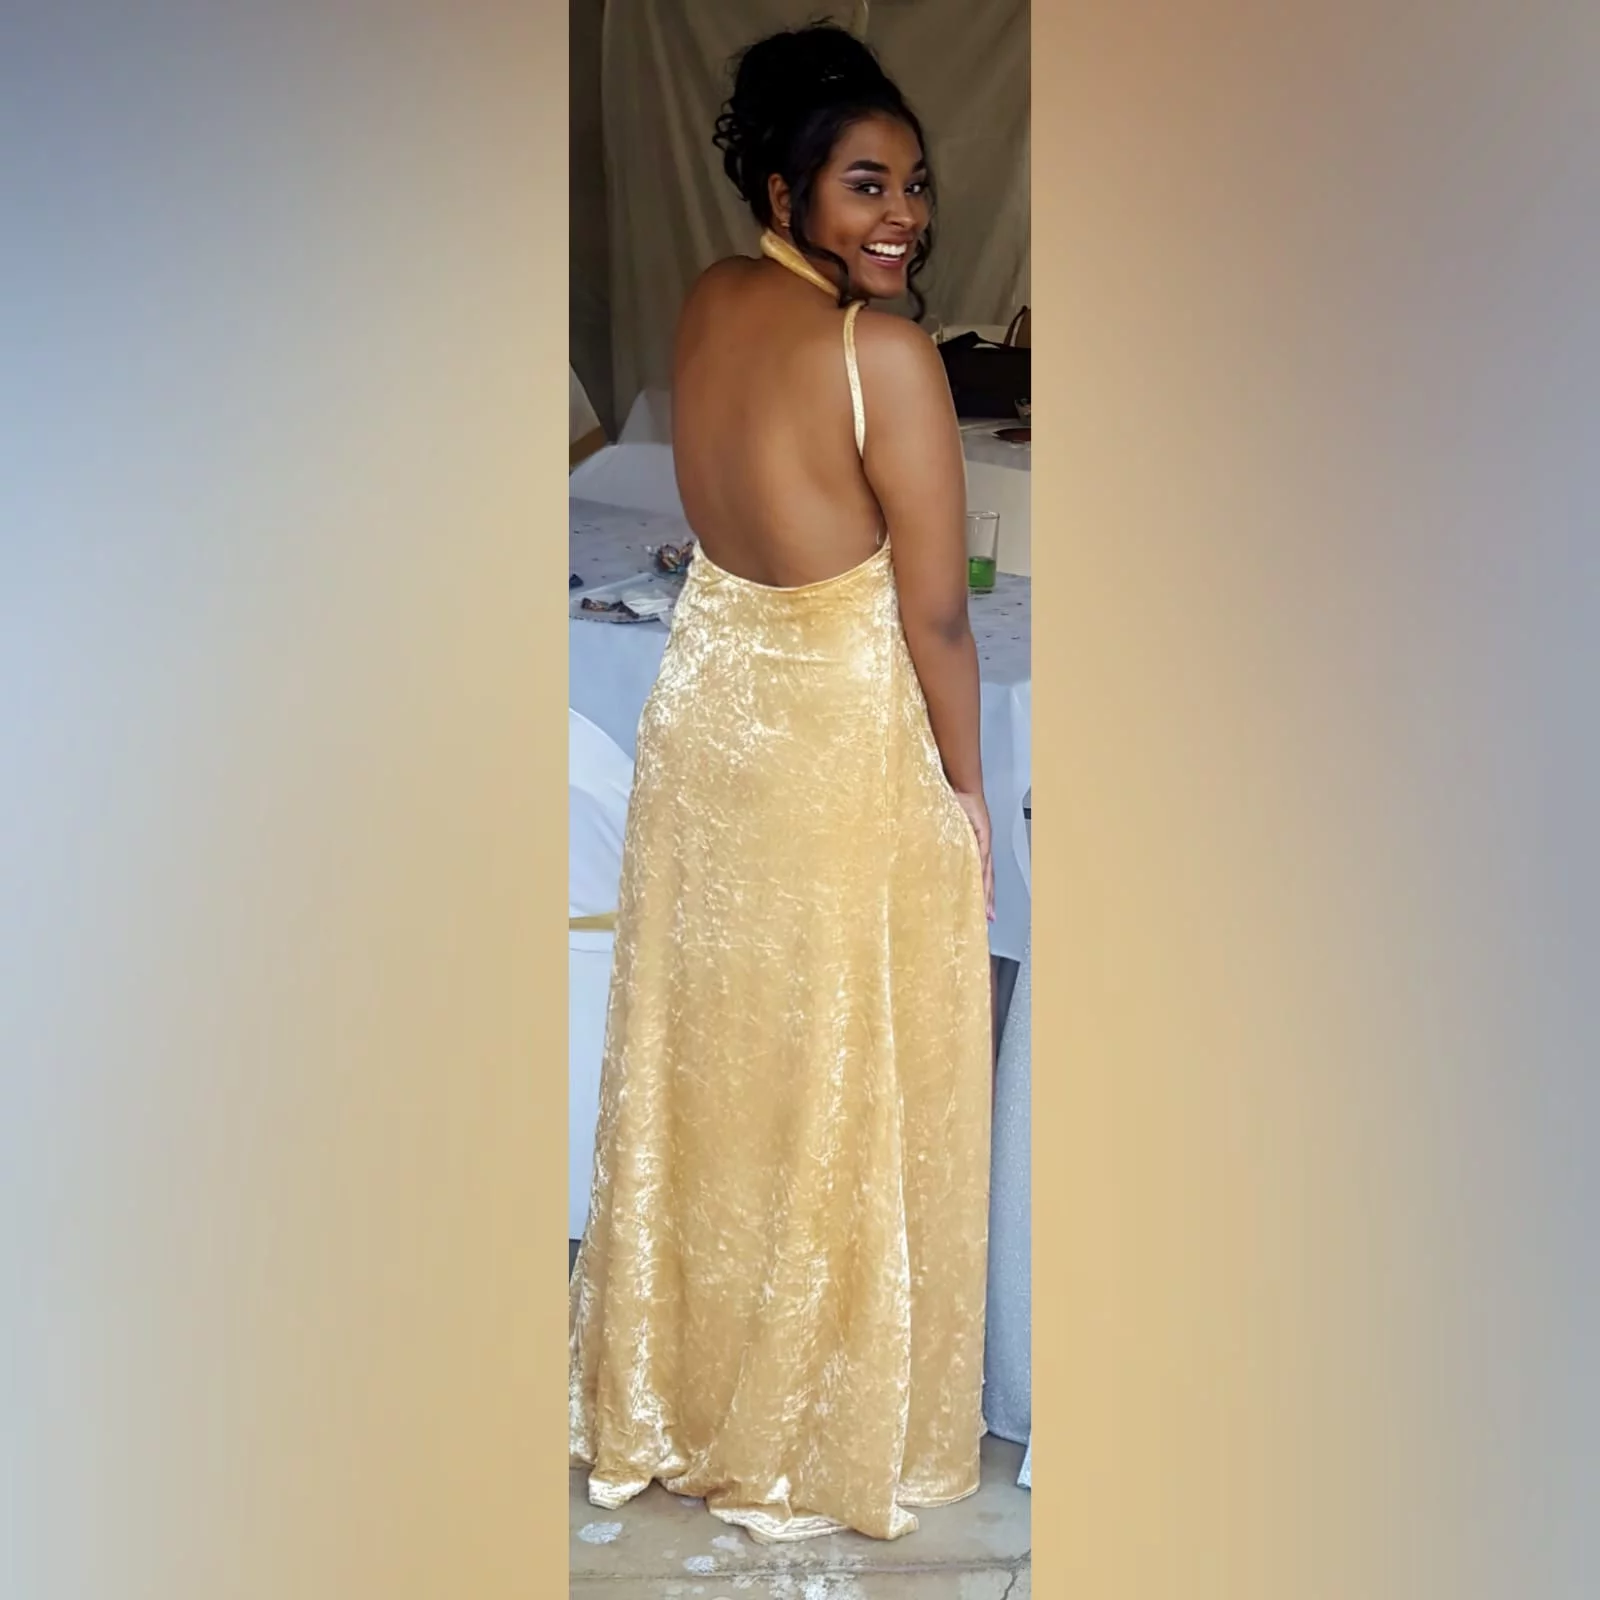 Champagne velvet long prom dress 5 champagne velvet long prom dress with a v neckline, rounded backless design with a high slit and a matching choker.